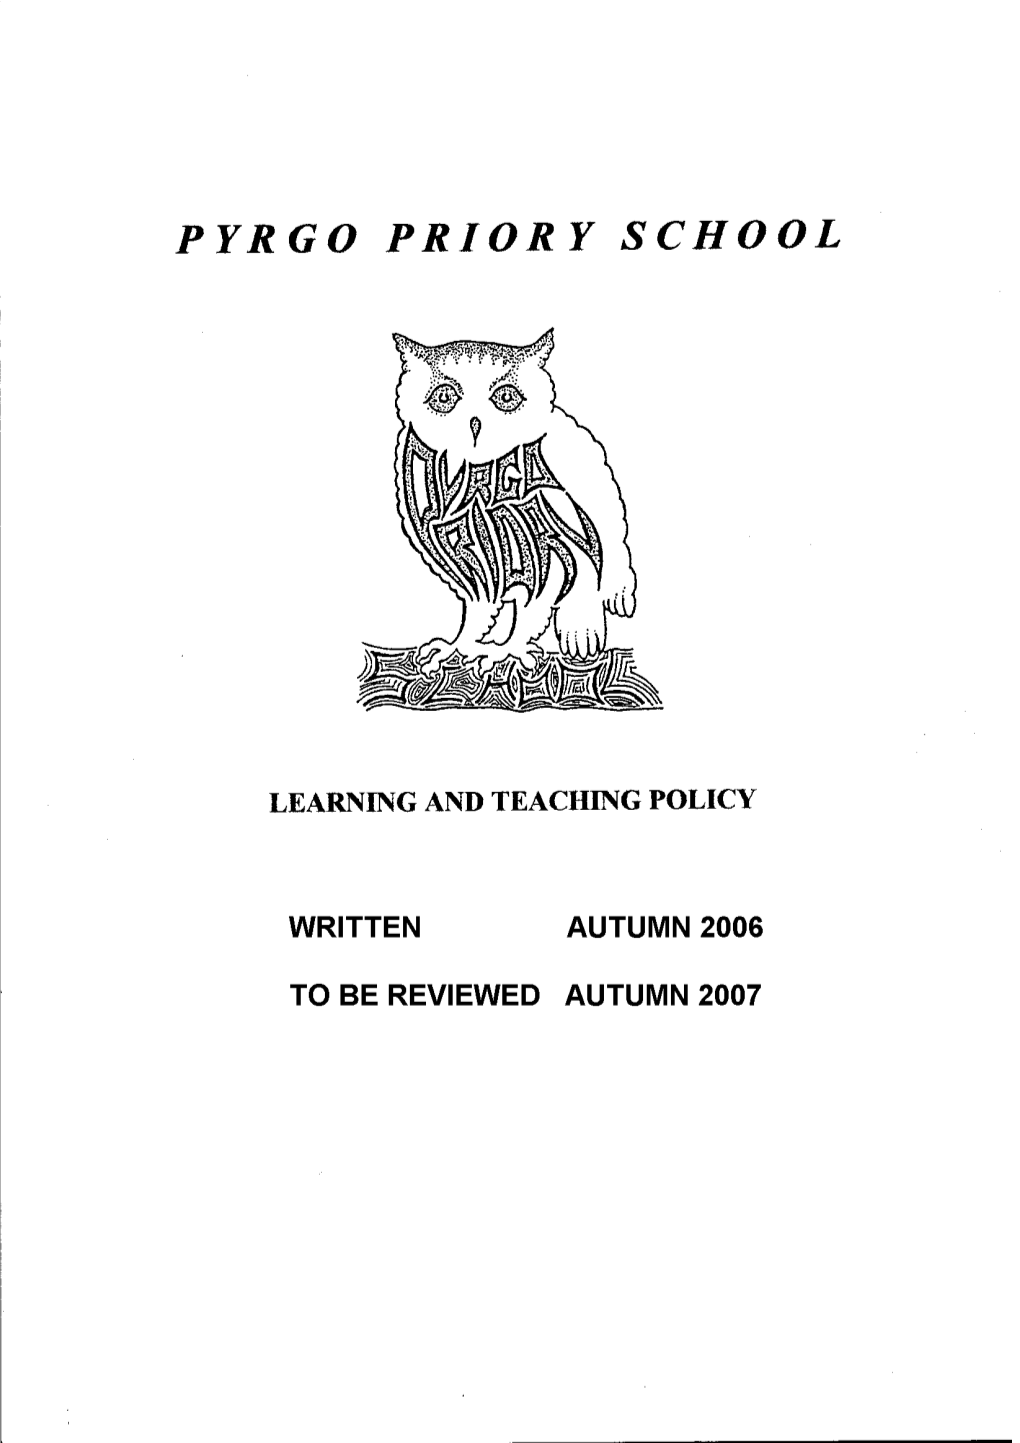 Learning and Teaching Policy for Pyrgo Priory Primary School